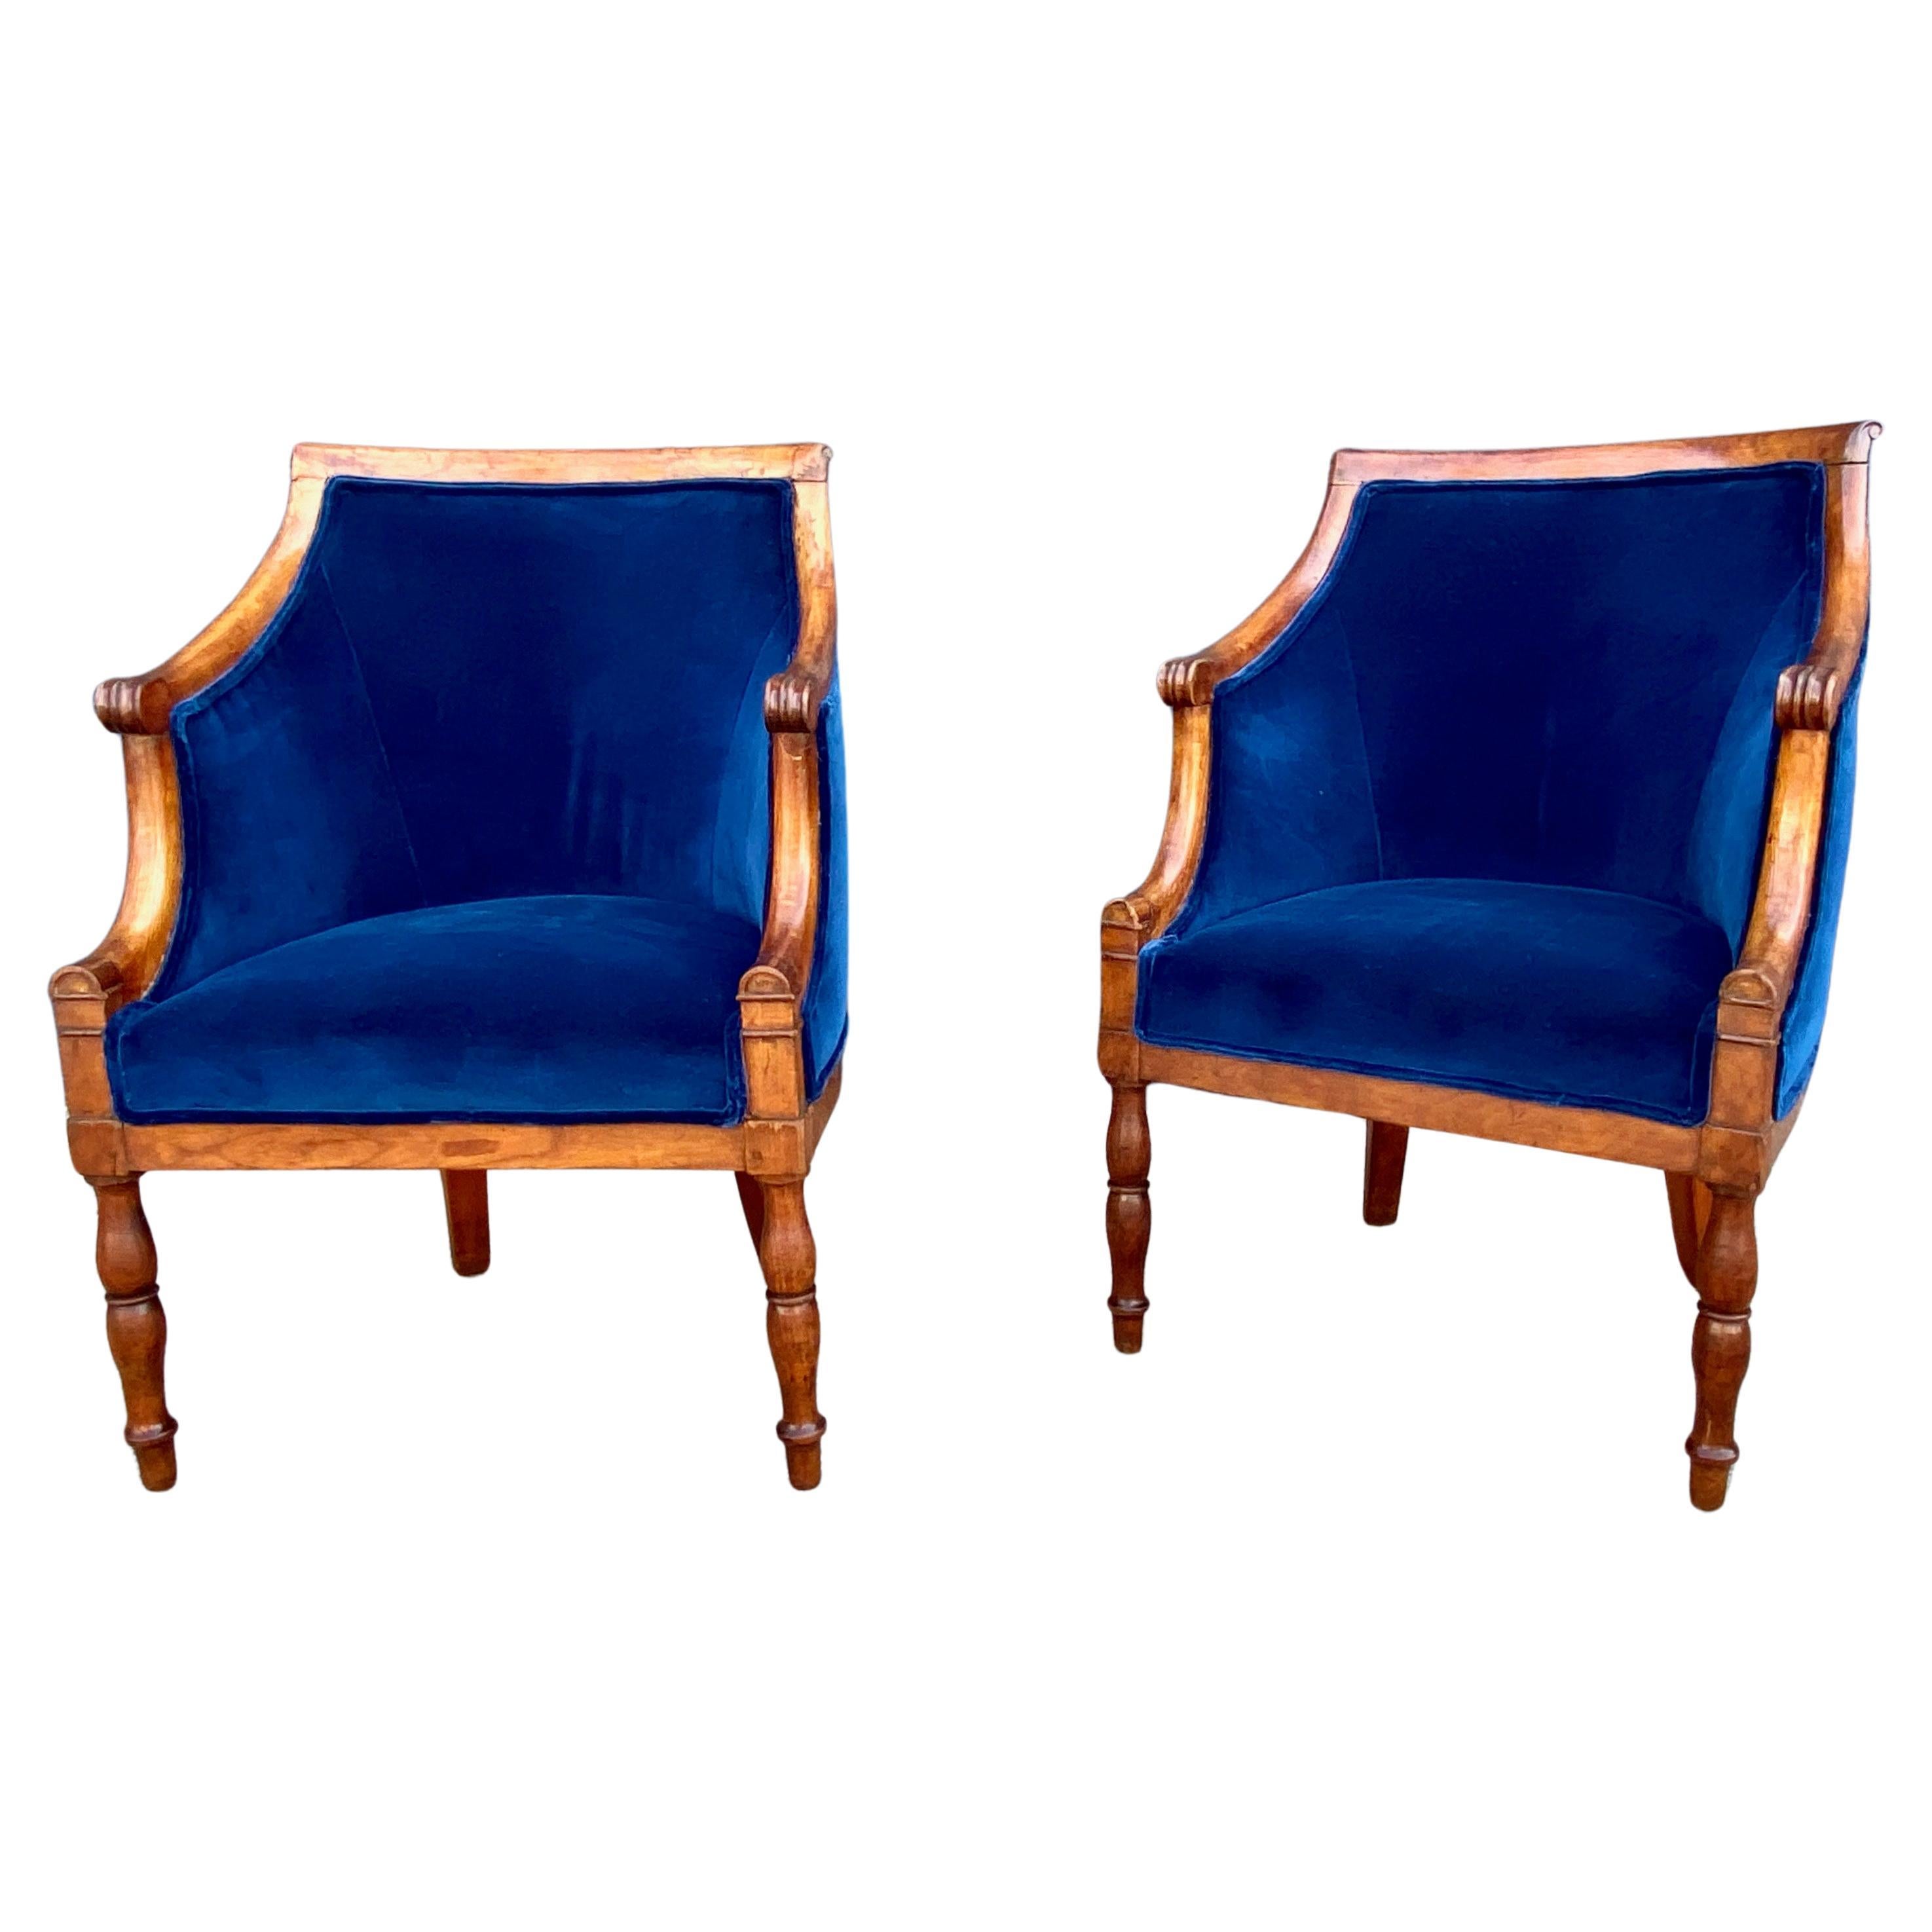 This is a very  desirable pair of period Lat Empire Barrel Back Bergeres that date to c. 1810-1820. The chairs have retained their original surface which we have cleaned and applied several coats of hard paste wax. The chairs are newly upholstered